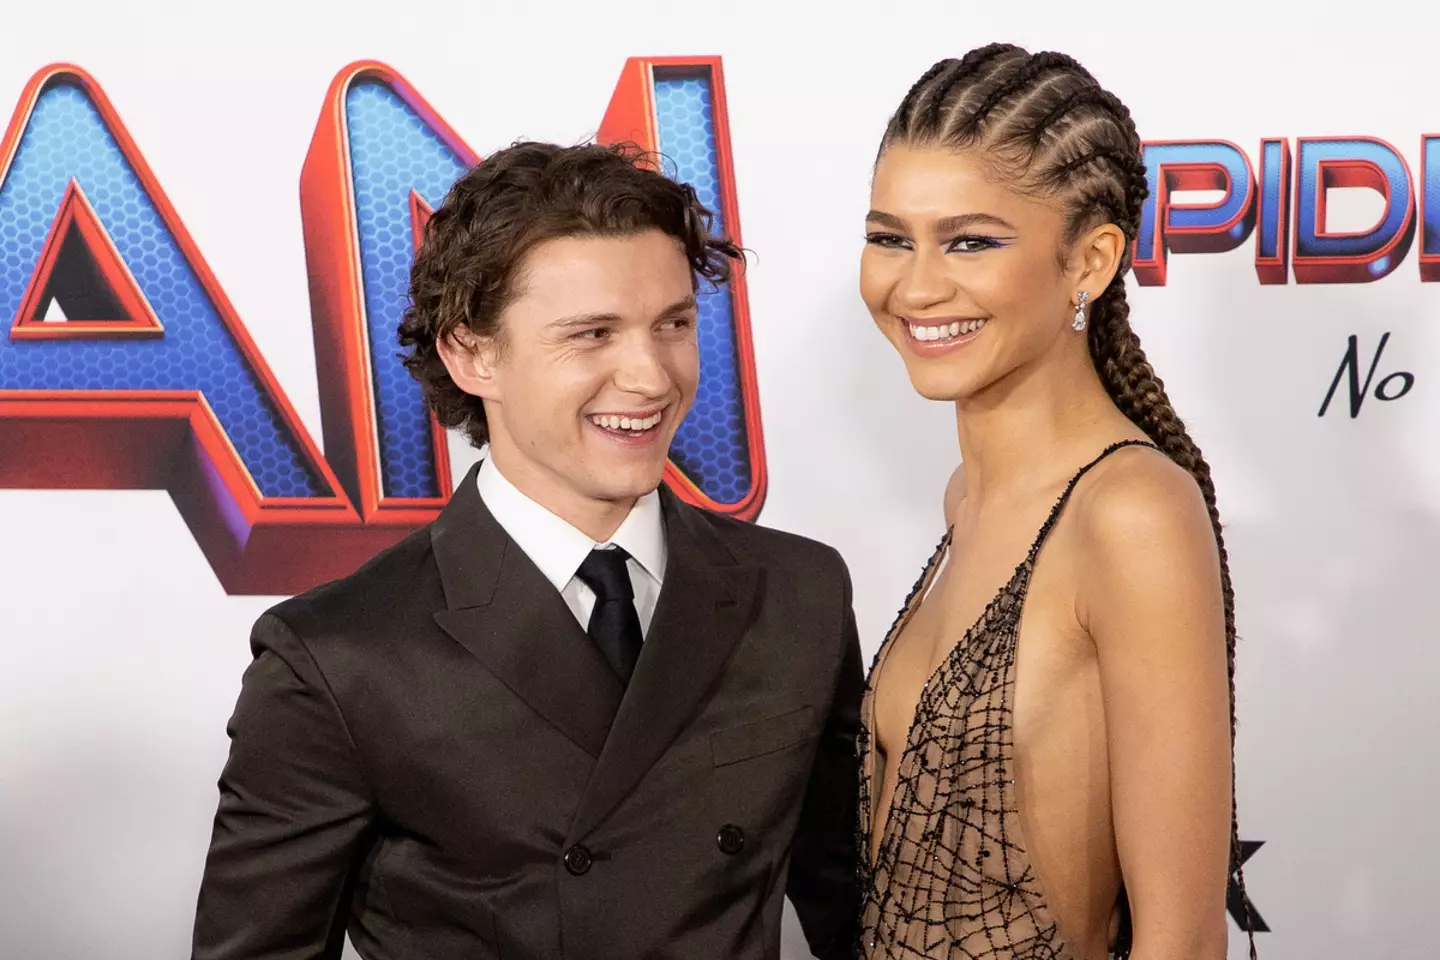 Both Tom Holland and Zendaya have spoken about how stardom affects their privacy.